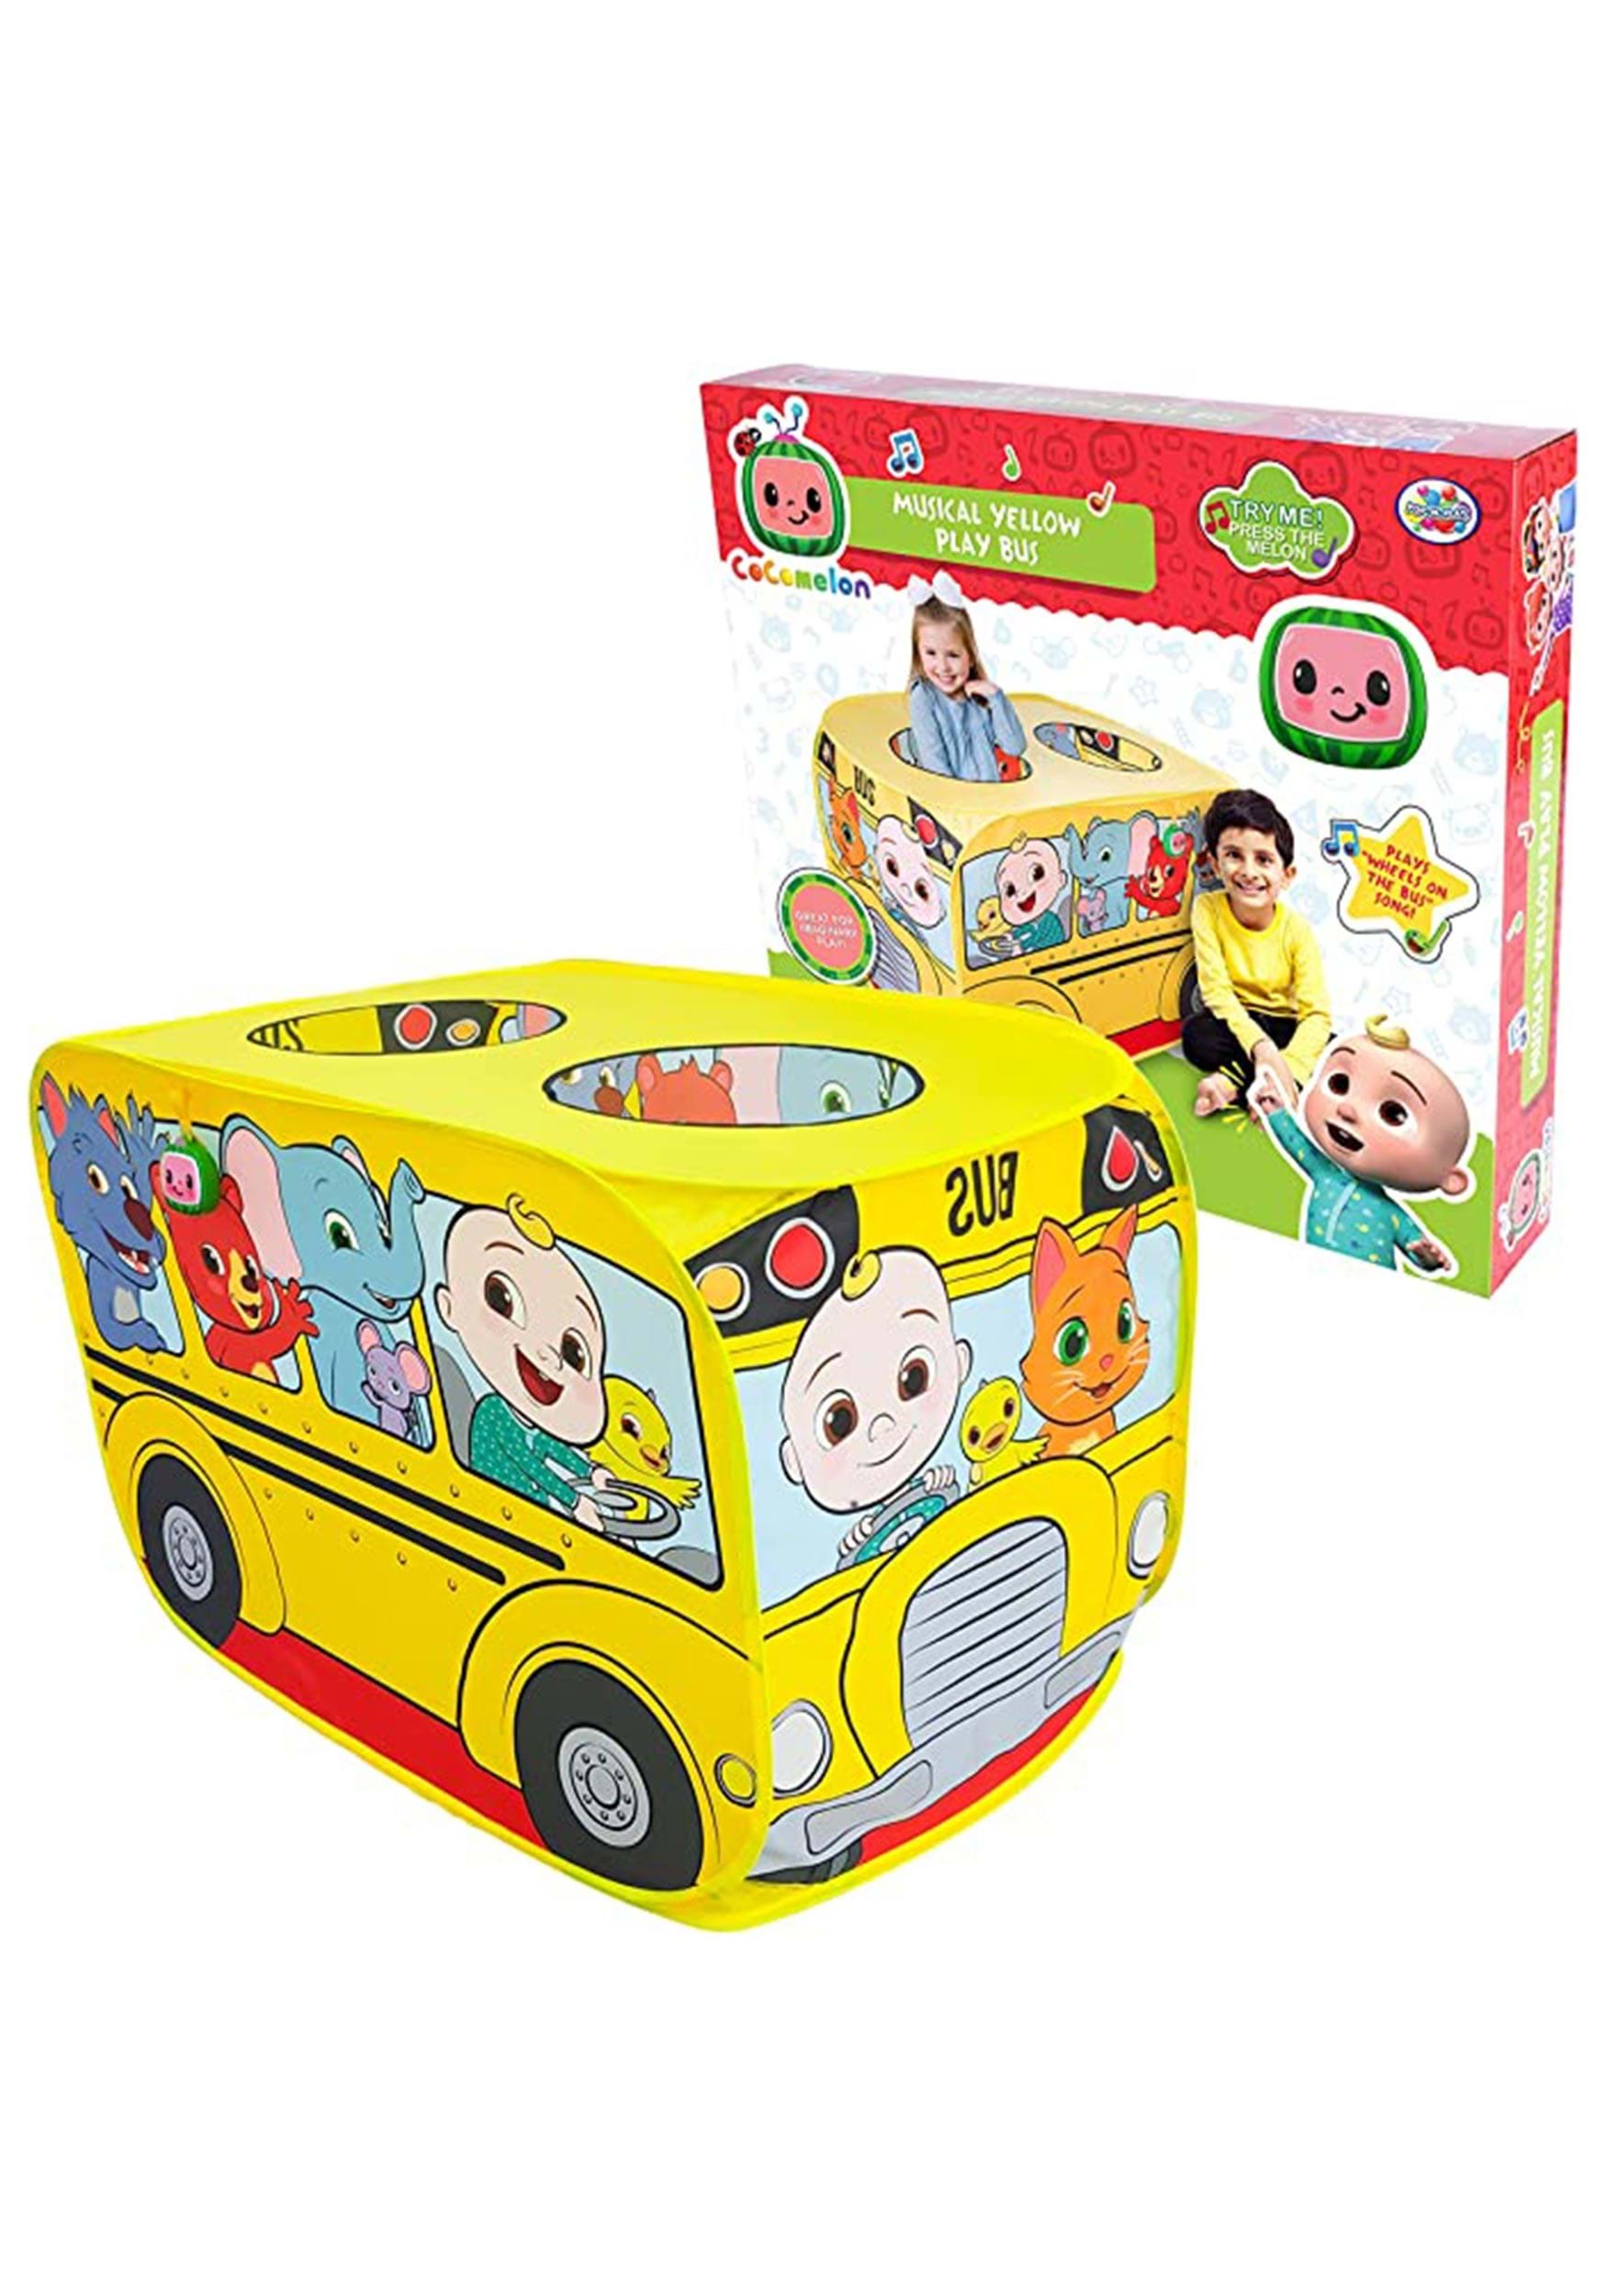 Cocomelon Musical Yellow School Bus Tent Playset